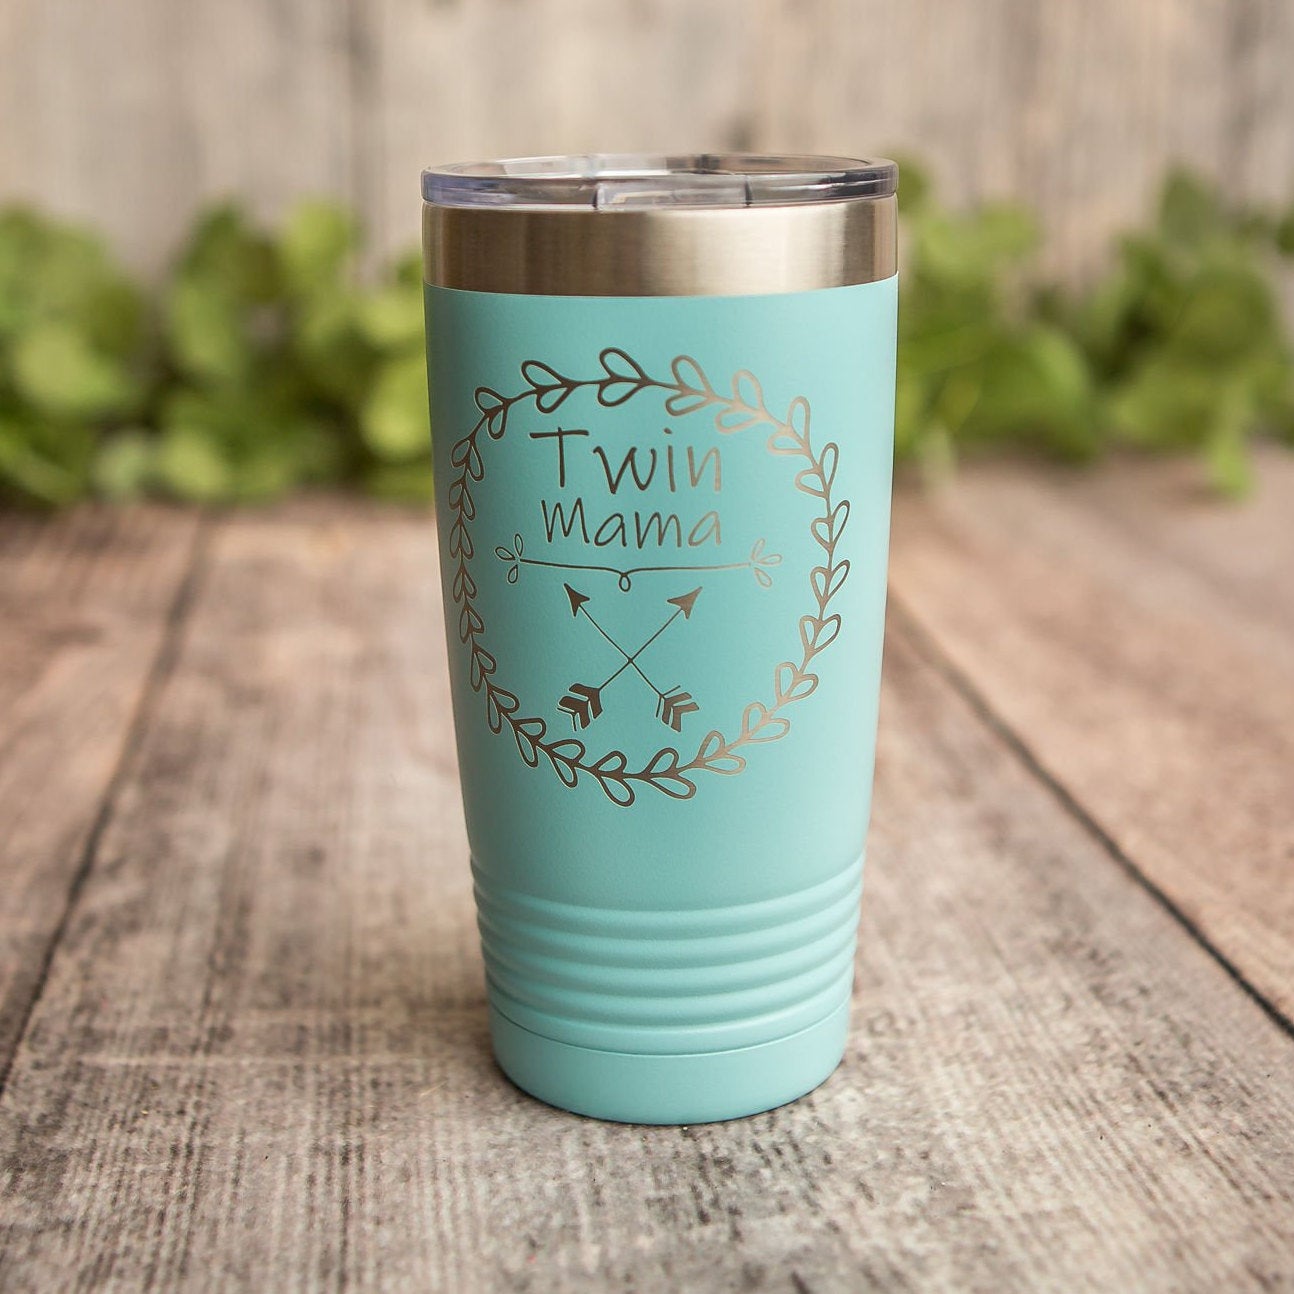 https://3cetching.com/wp-content/uploads/2020/09/twin-mama-engraved-stainless-steel-tumbler-twin-mom-tumbler-twin-mom-gift-5f5faabf.jpg